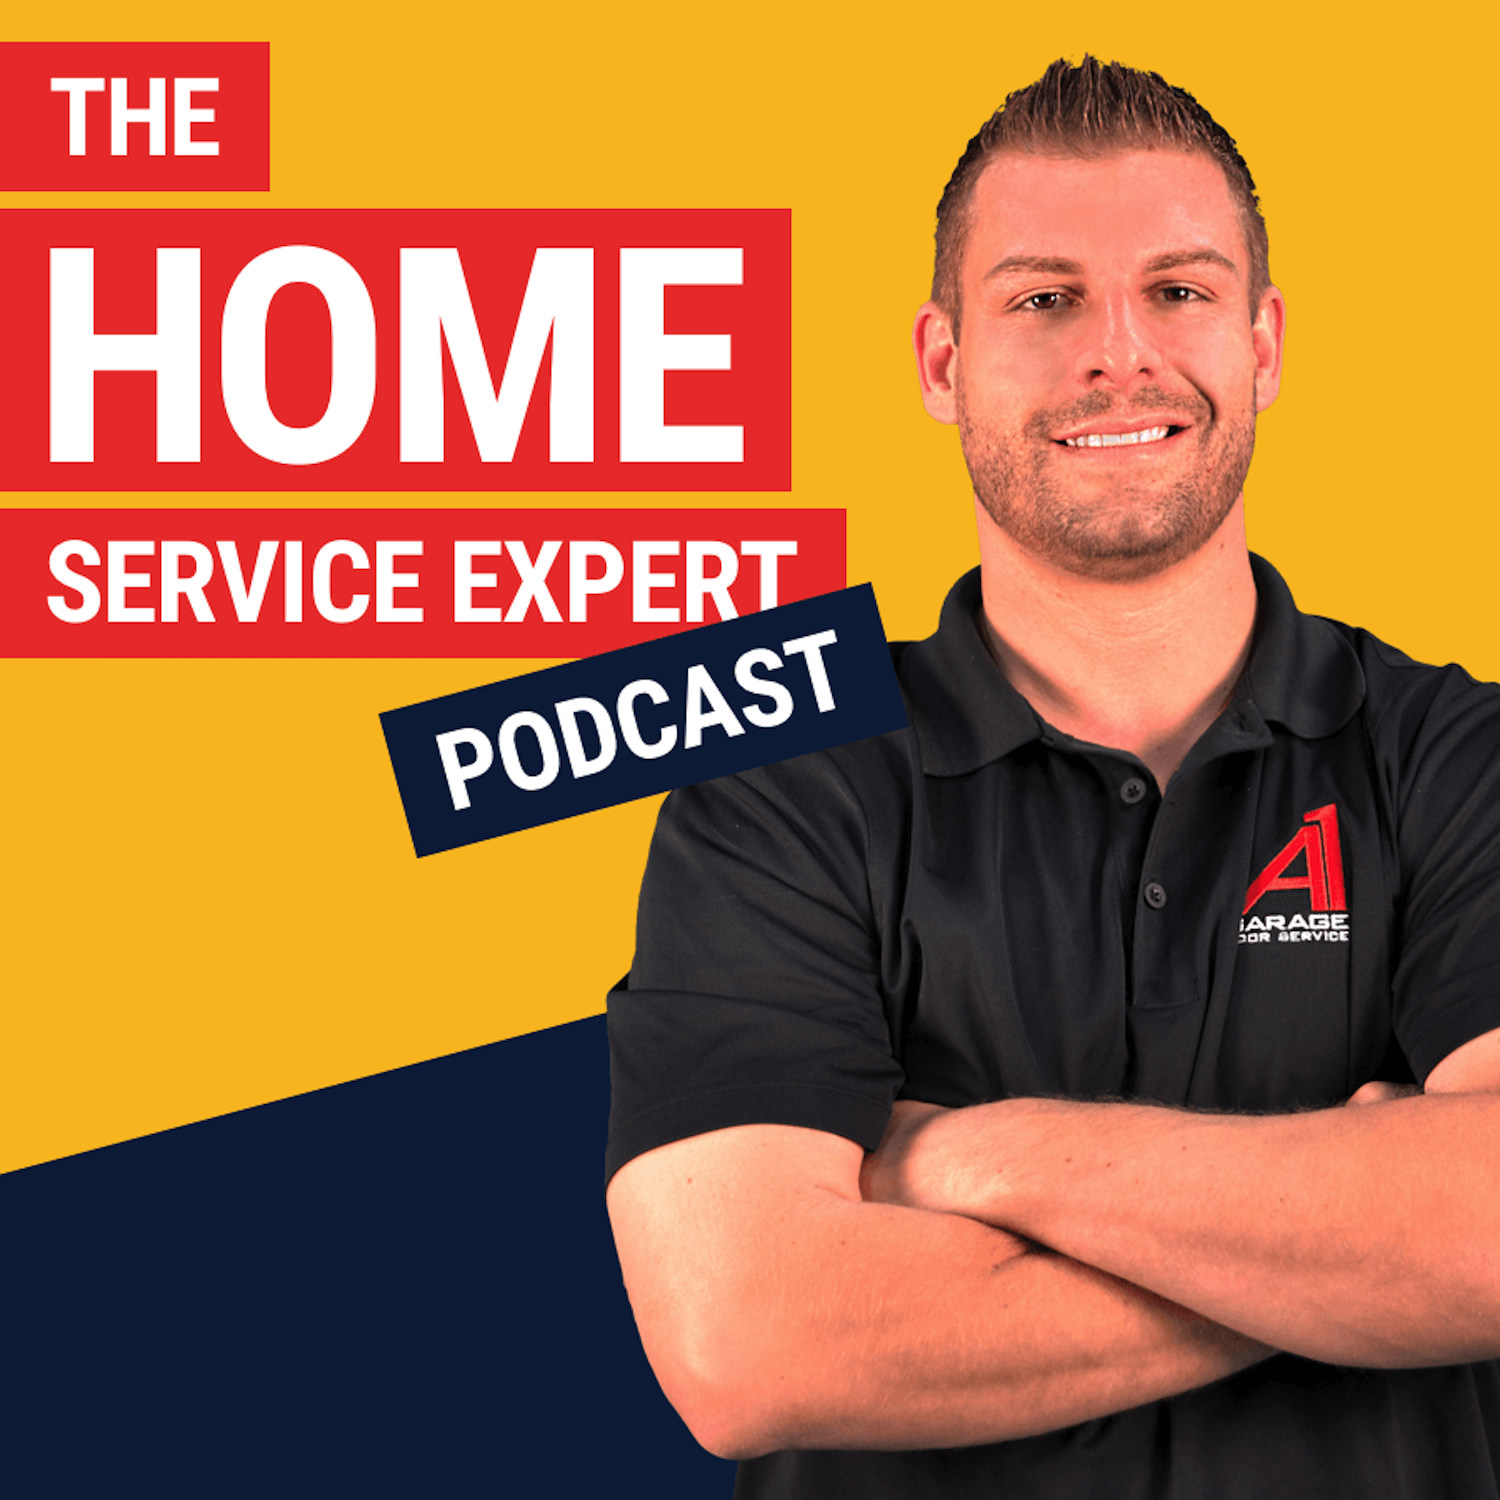 The Home Service Expert Podcast